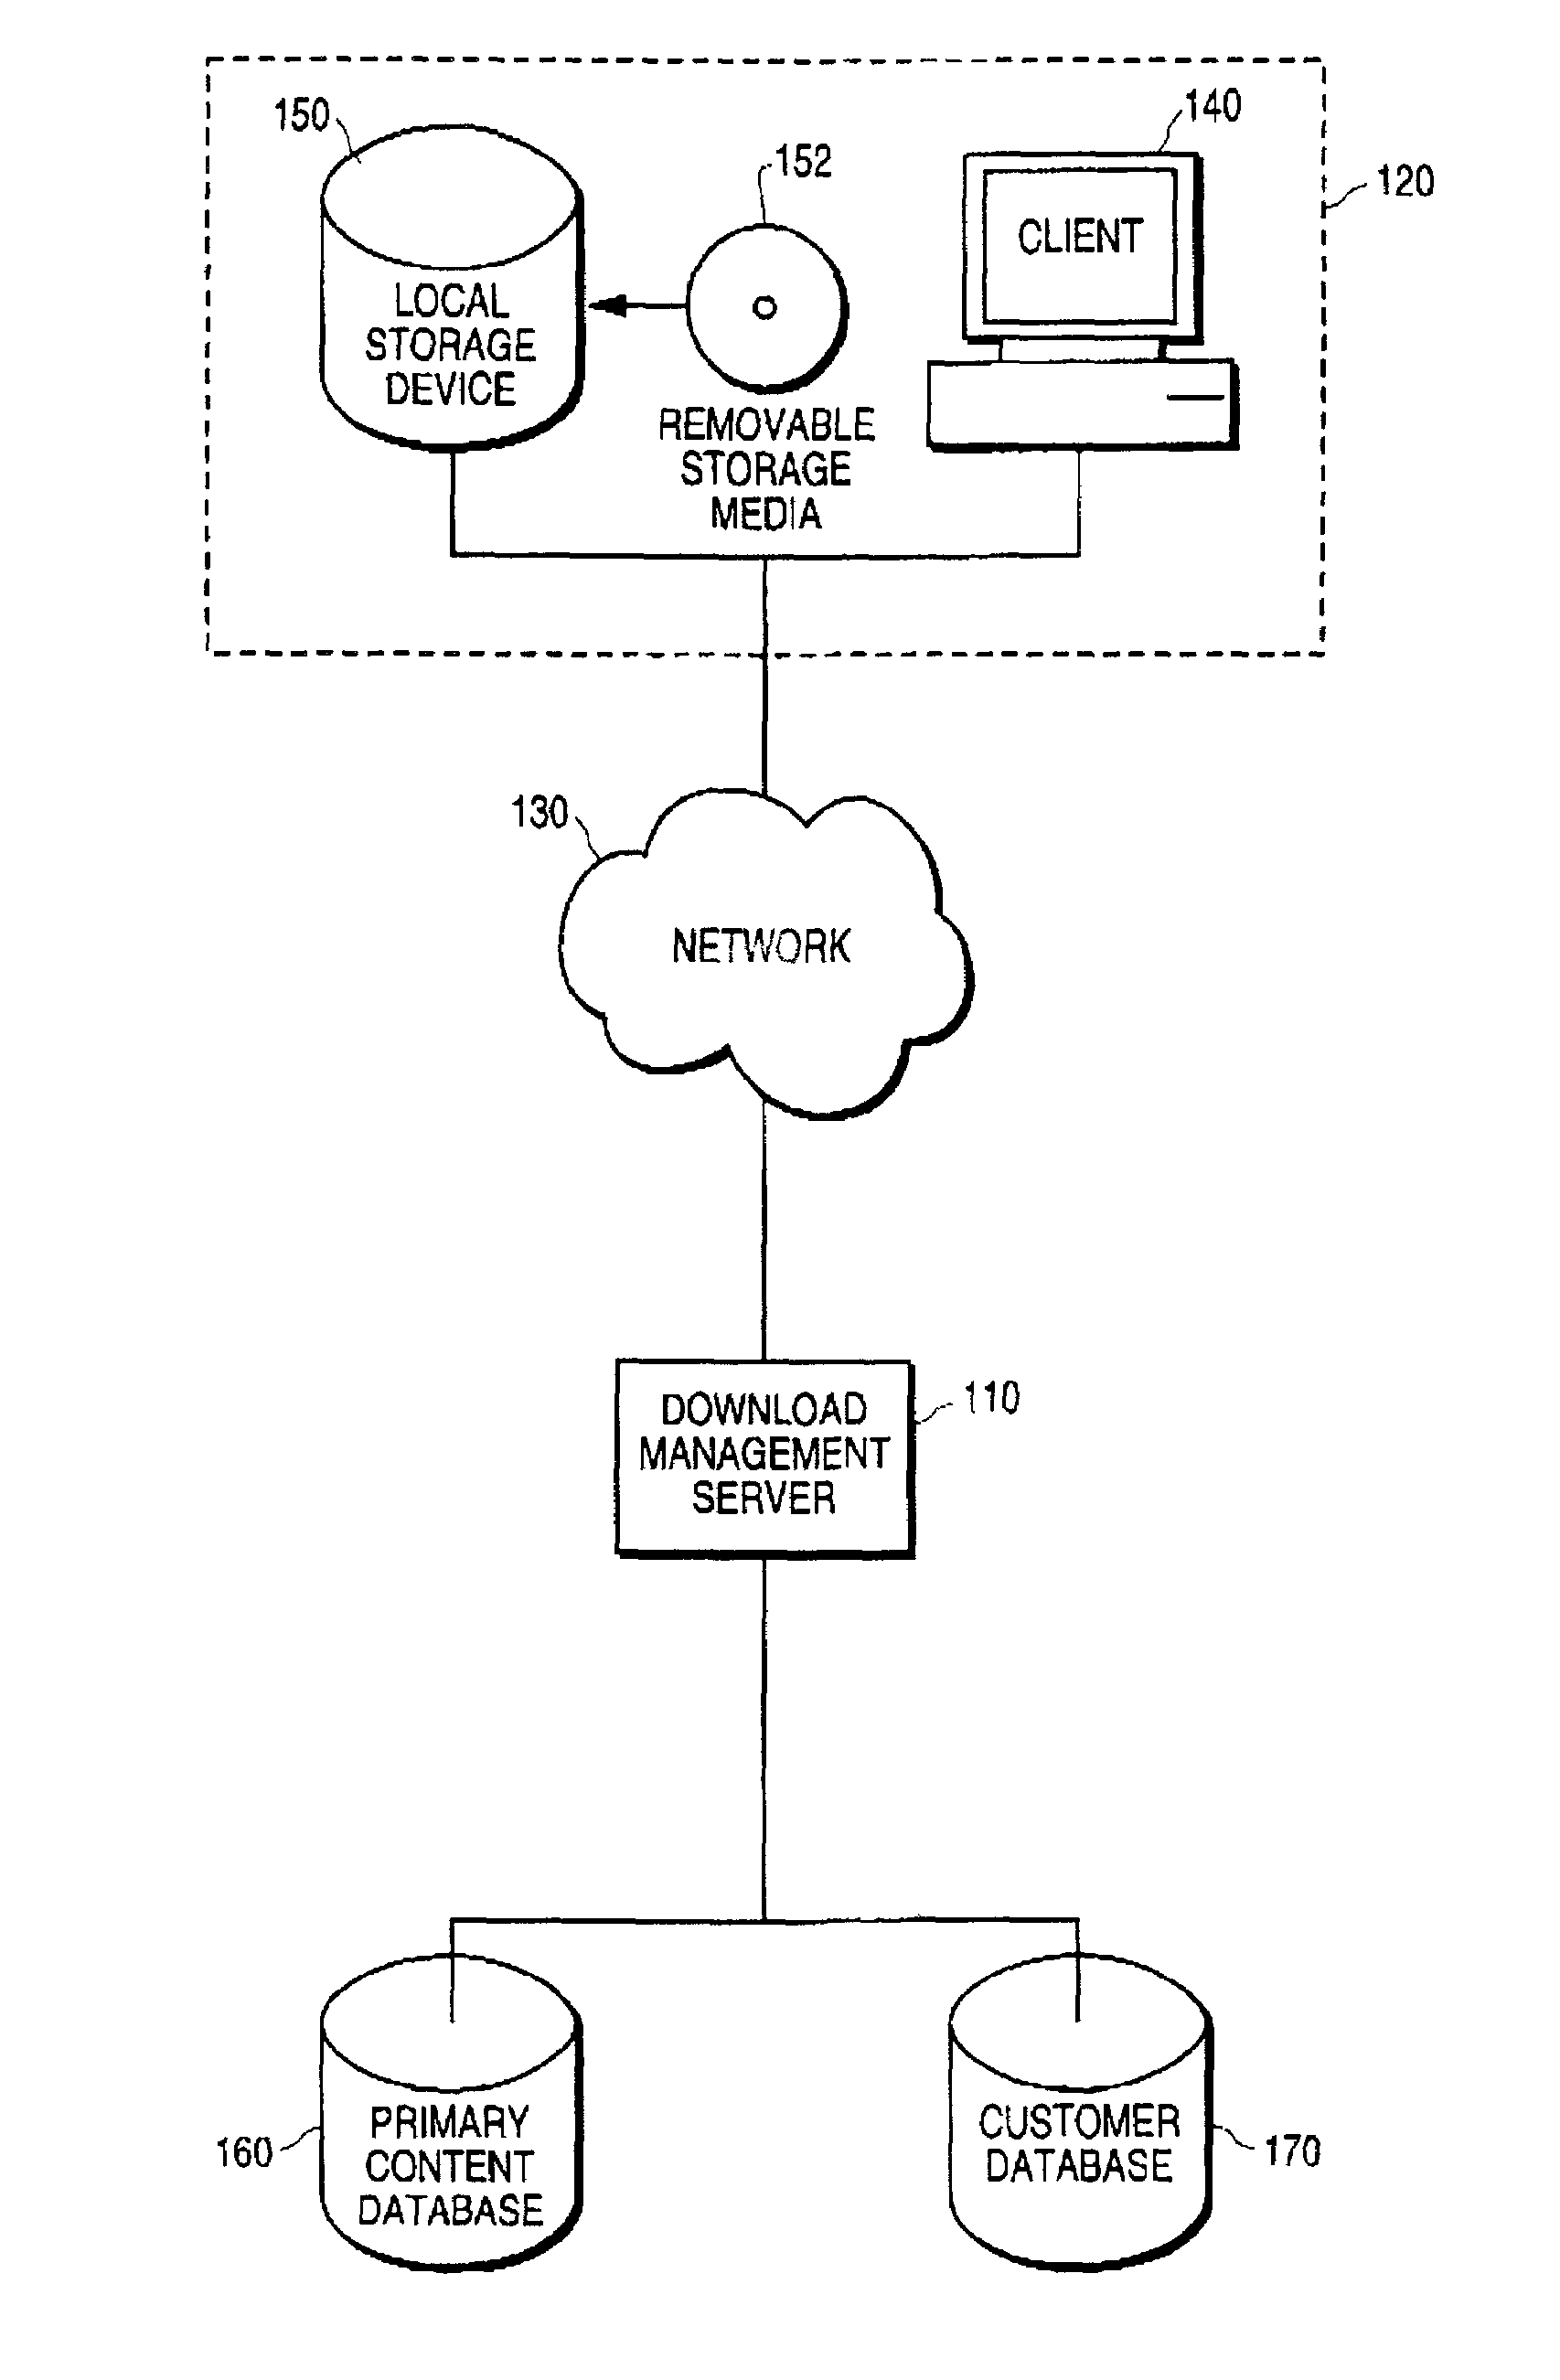 Method and system for providing auxiliary content located on local storage during download/access of primary content over a network